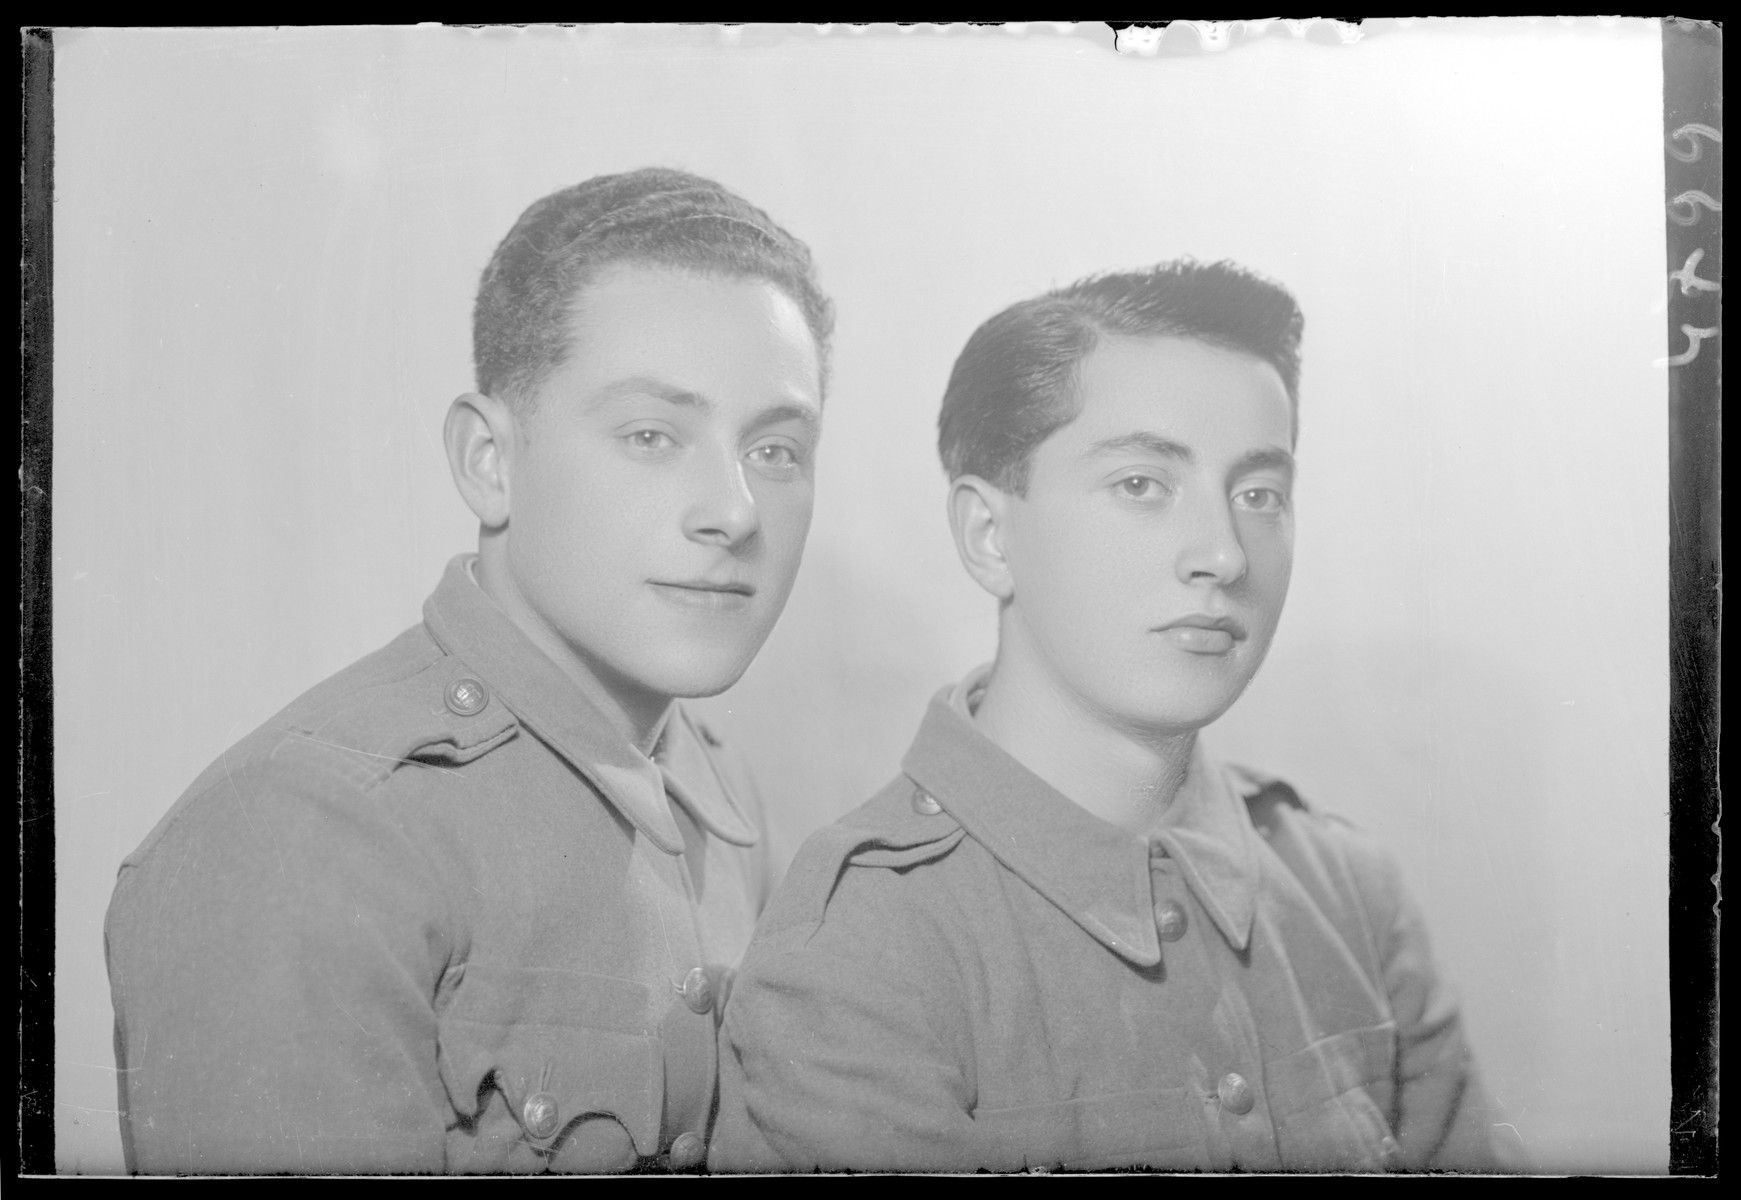 Studio portrait of two young men, one of whom is Miklas Fried.